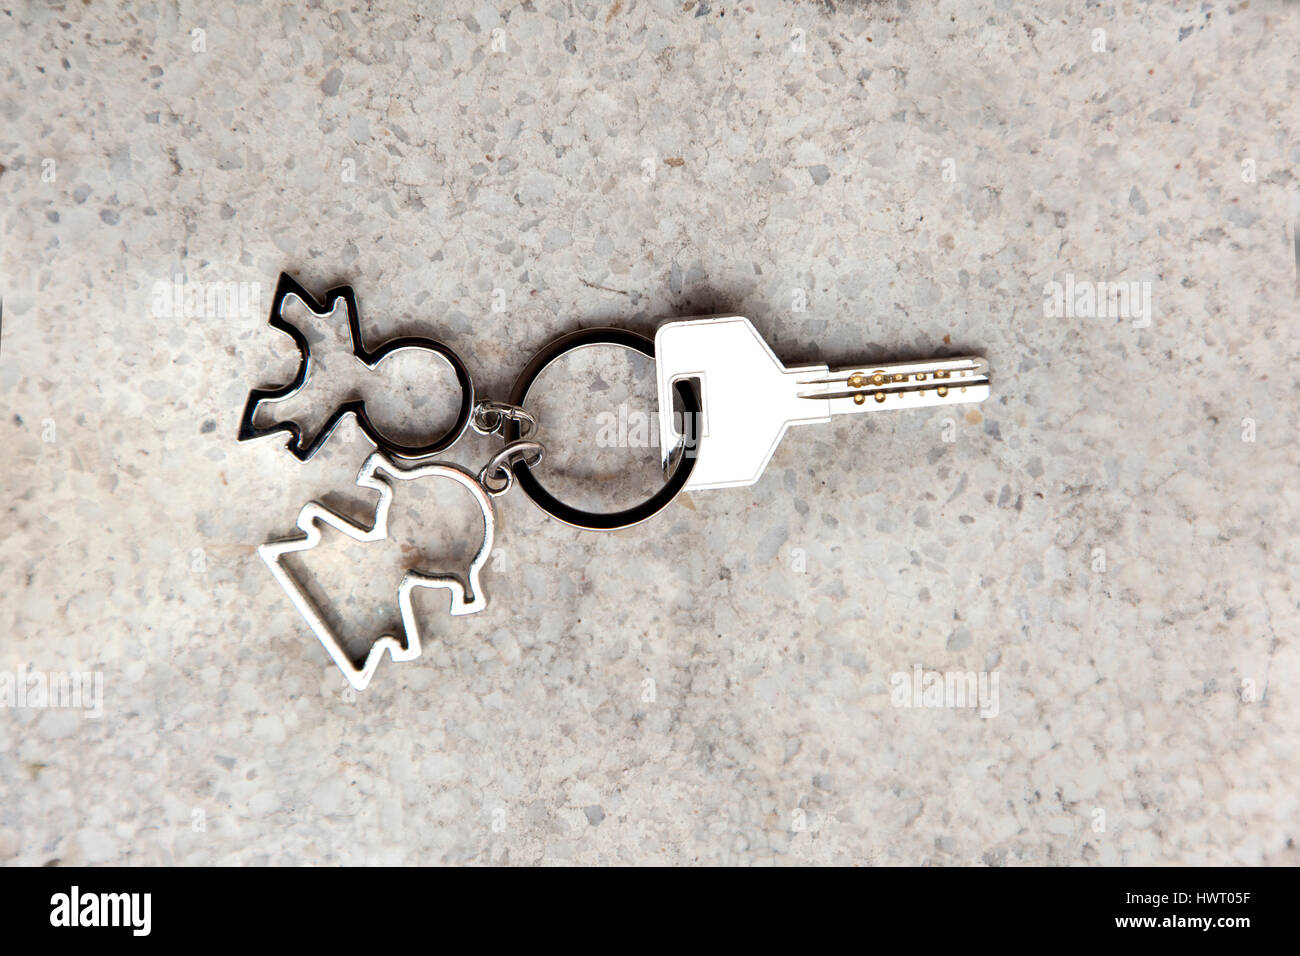 Keyring with a male and female shapes representing couples moving together. Stock Photo